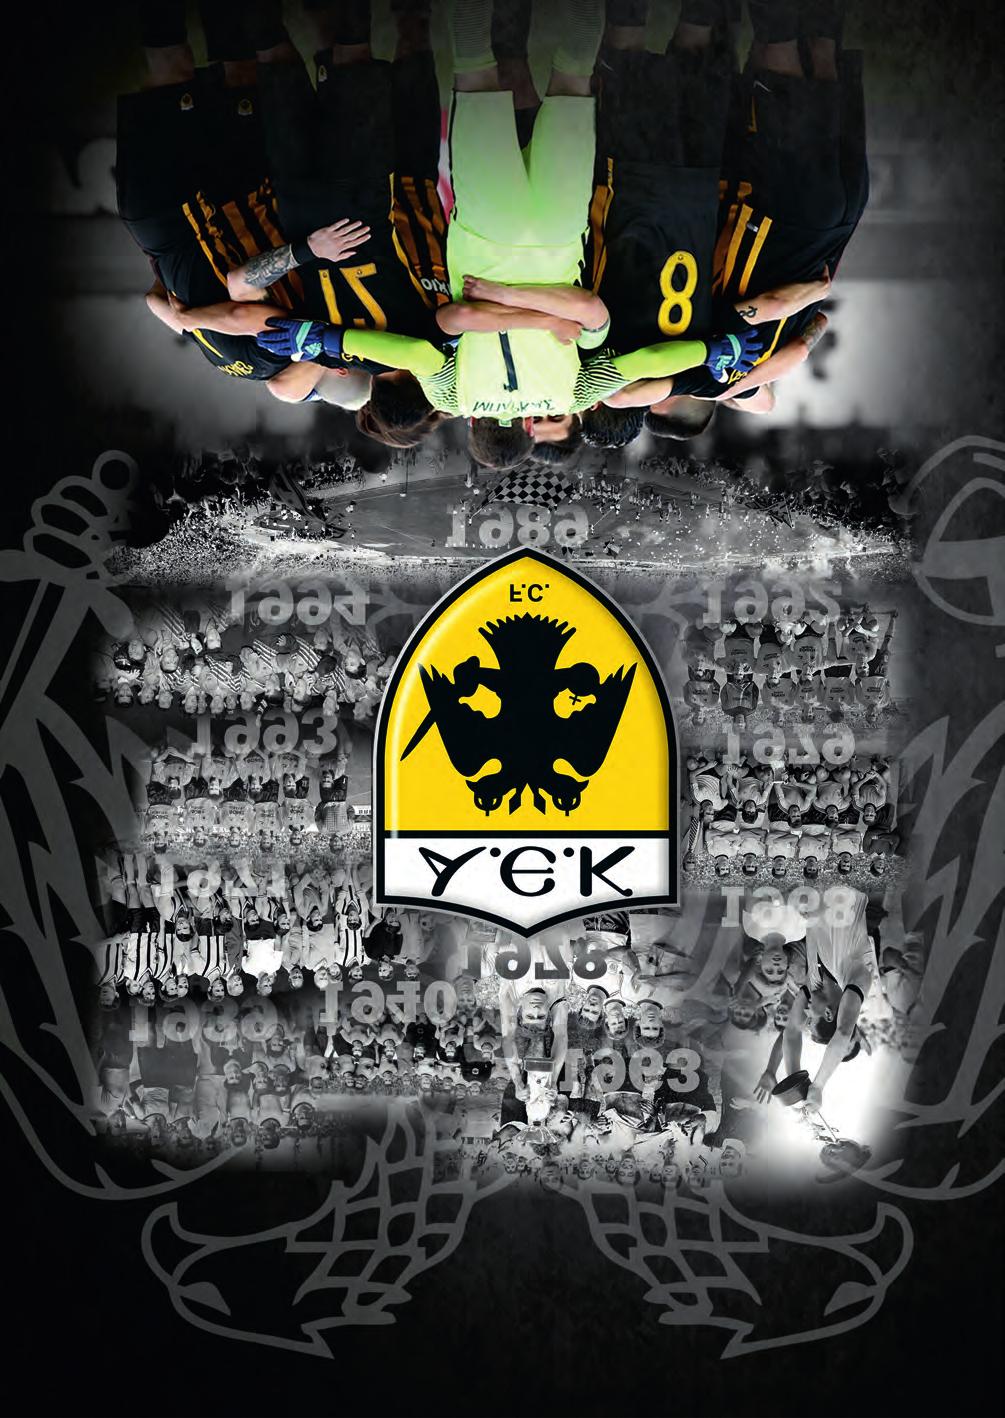 AEK FC THE OFFICIAL